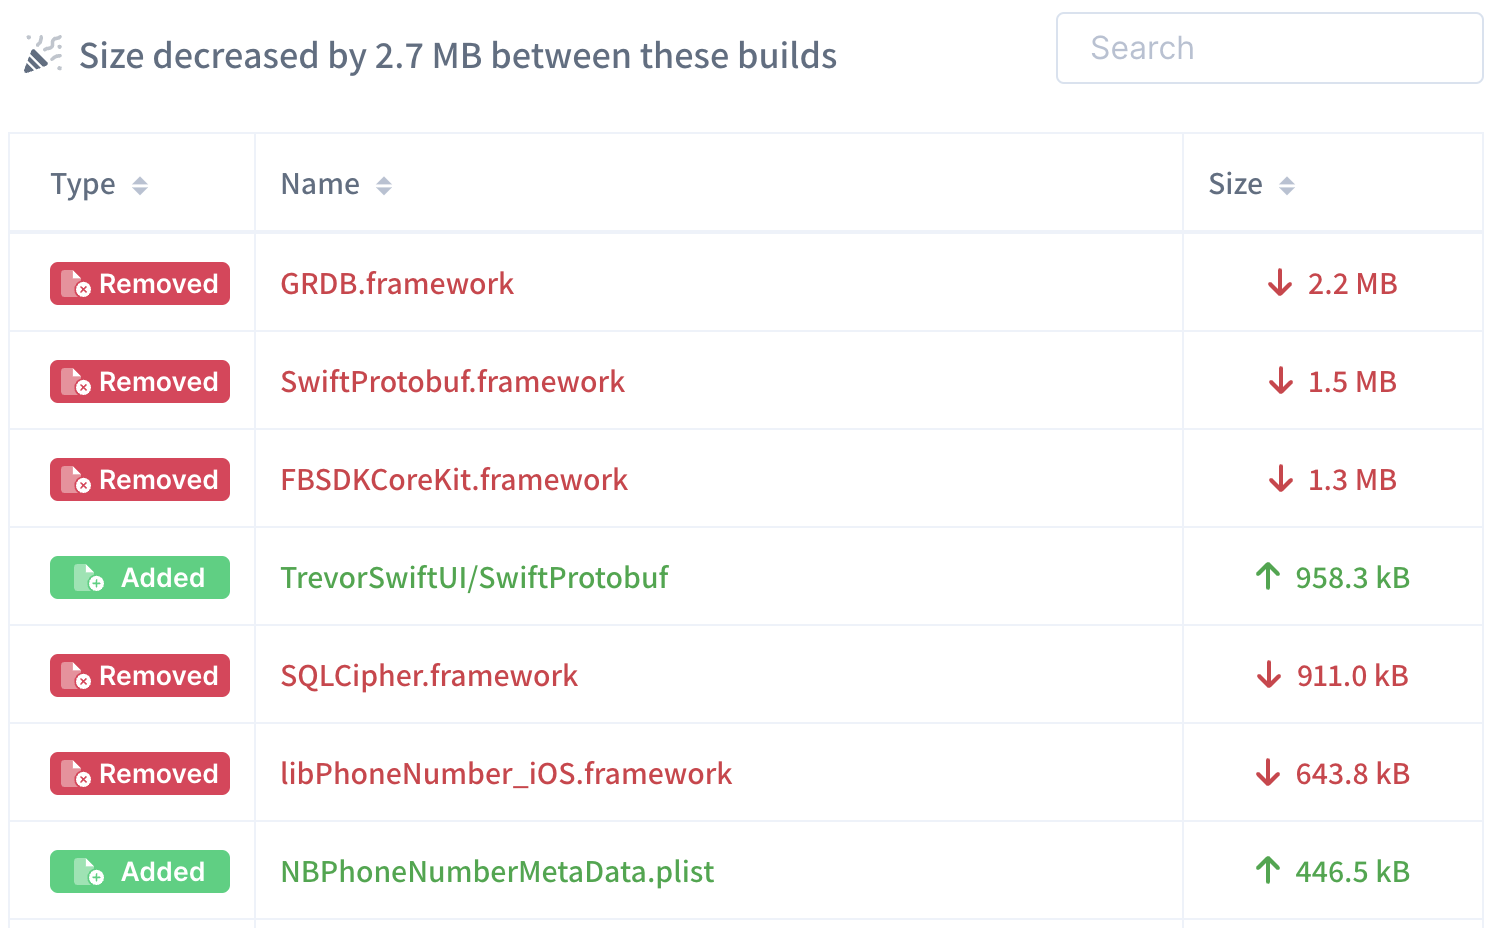 Comparison between two builds showing a size decrease in the version using static frameworks